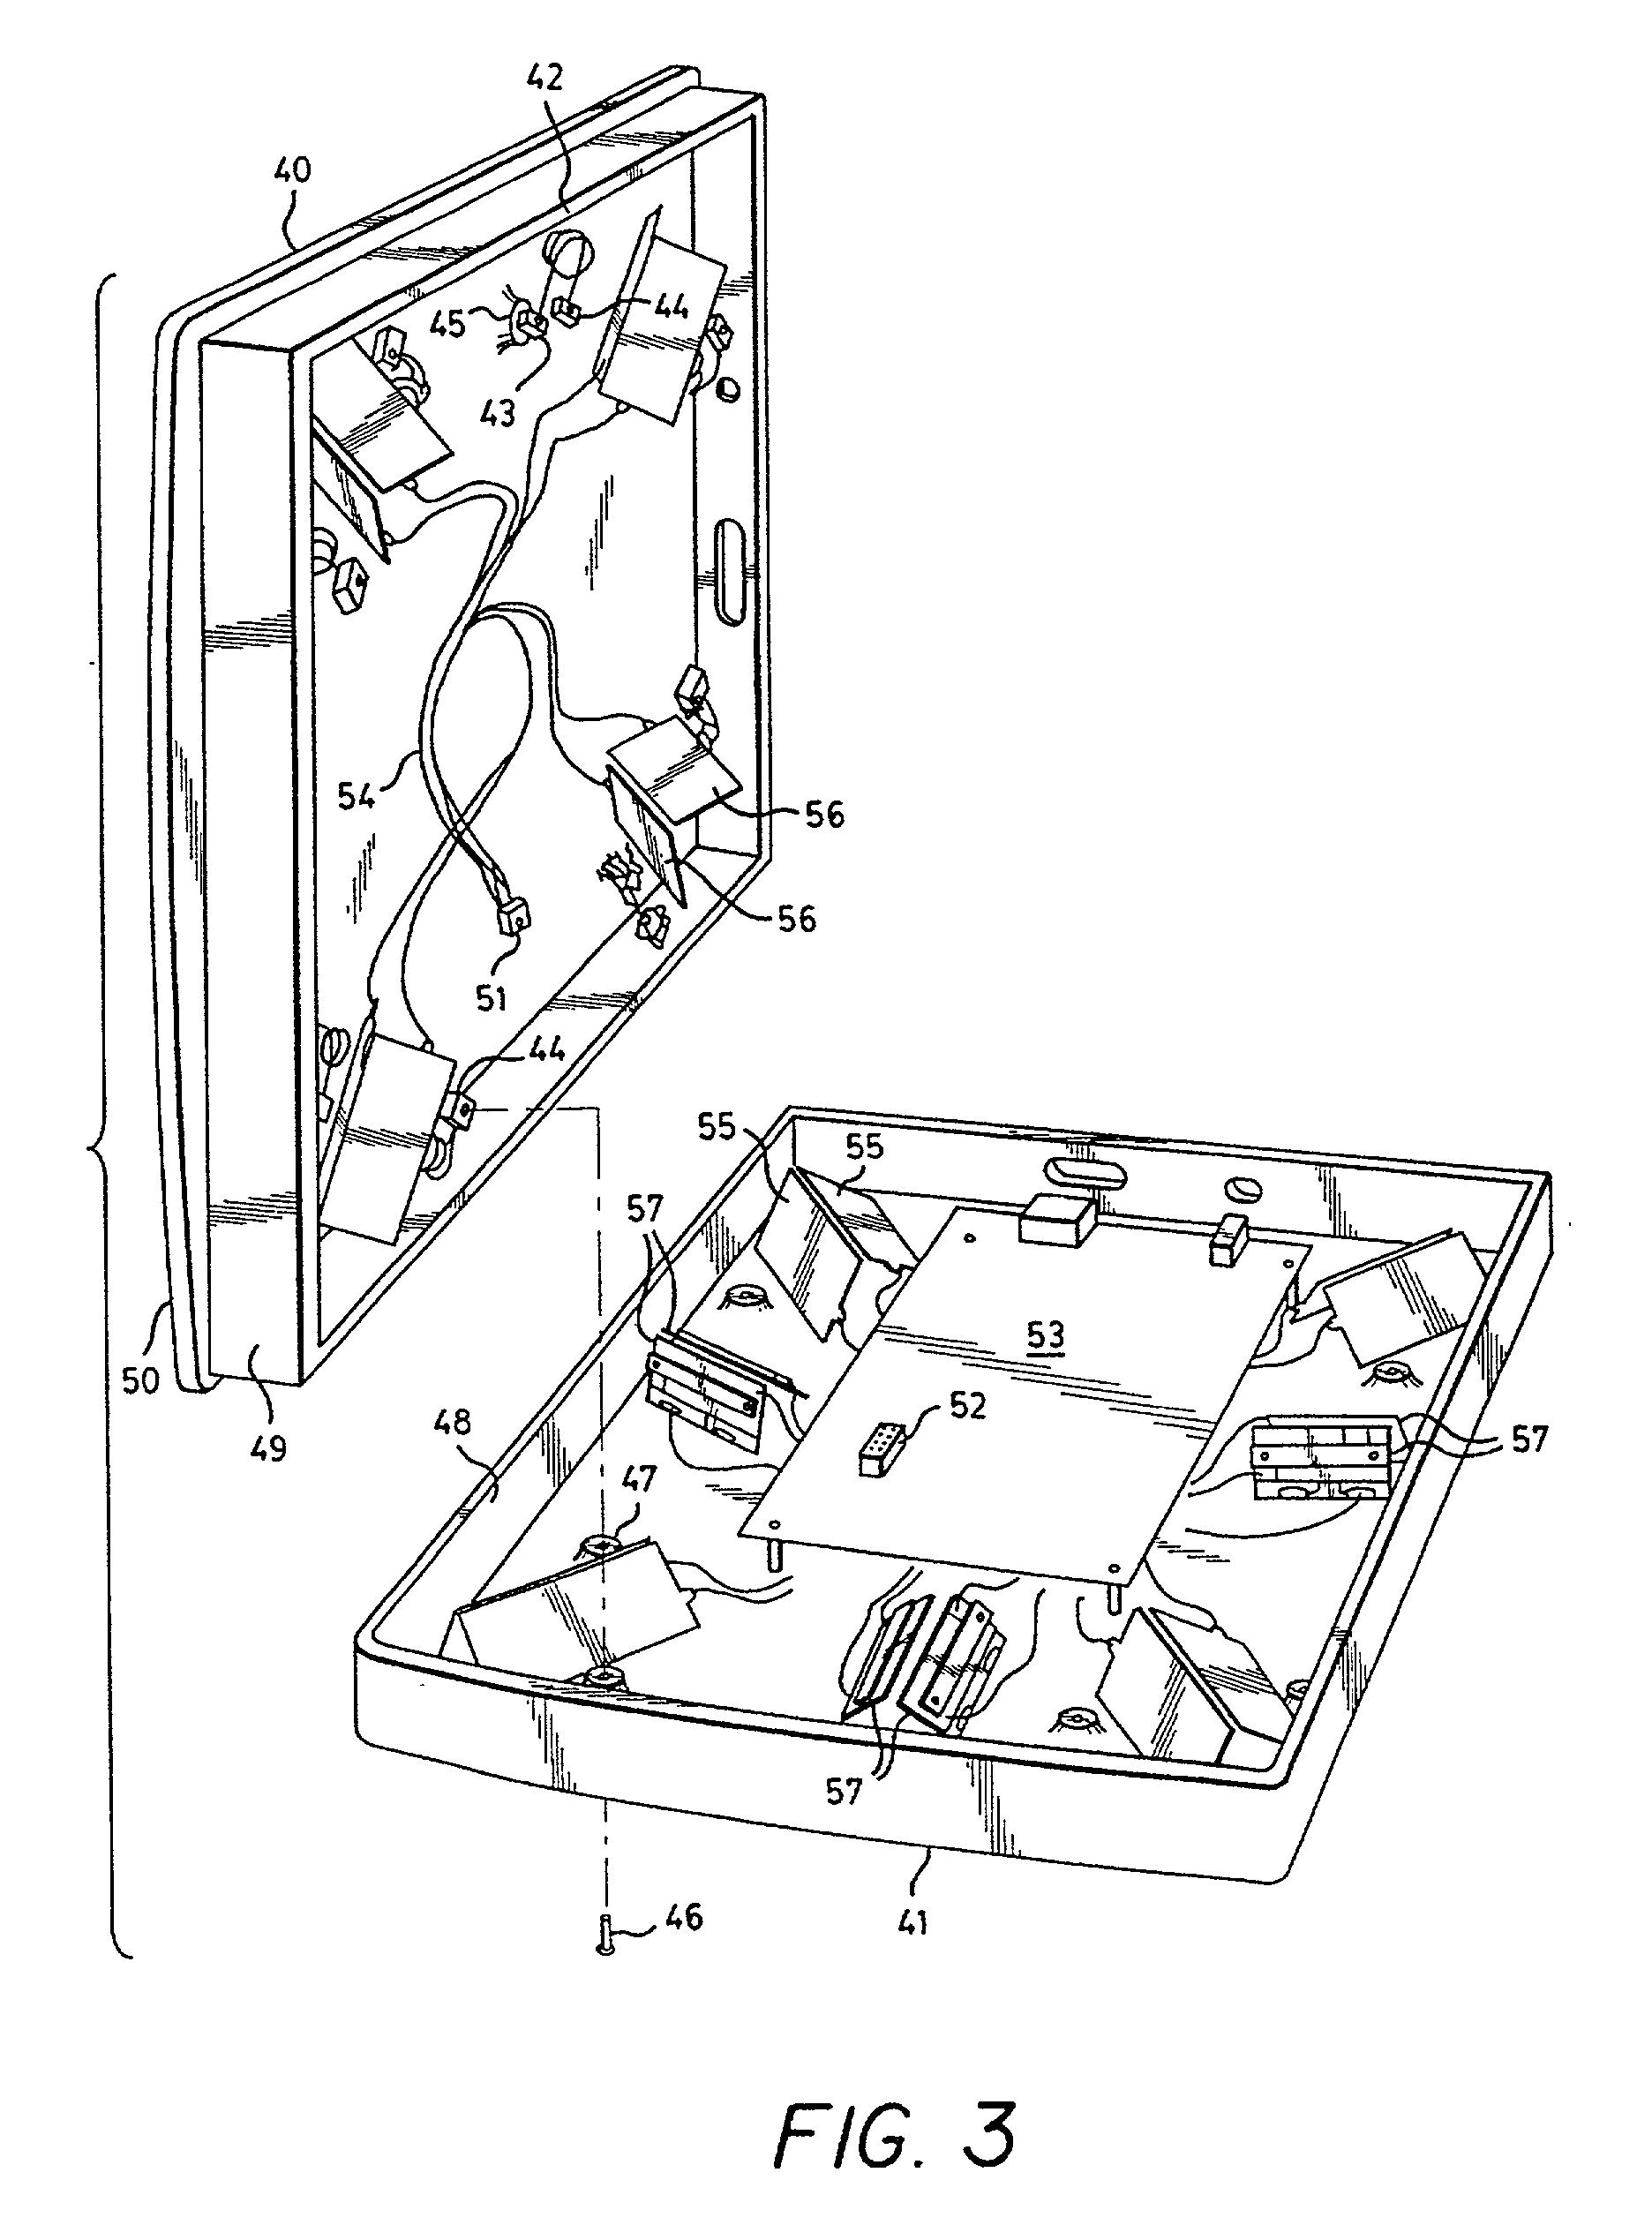 Method of and apparatus for the elimination of the effects of inertial interference in force measurement systems, including touch-input computer and related displays employing touch force location measurement techniques